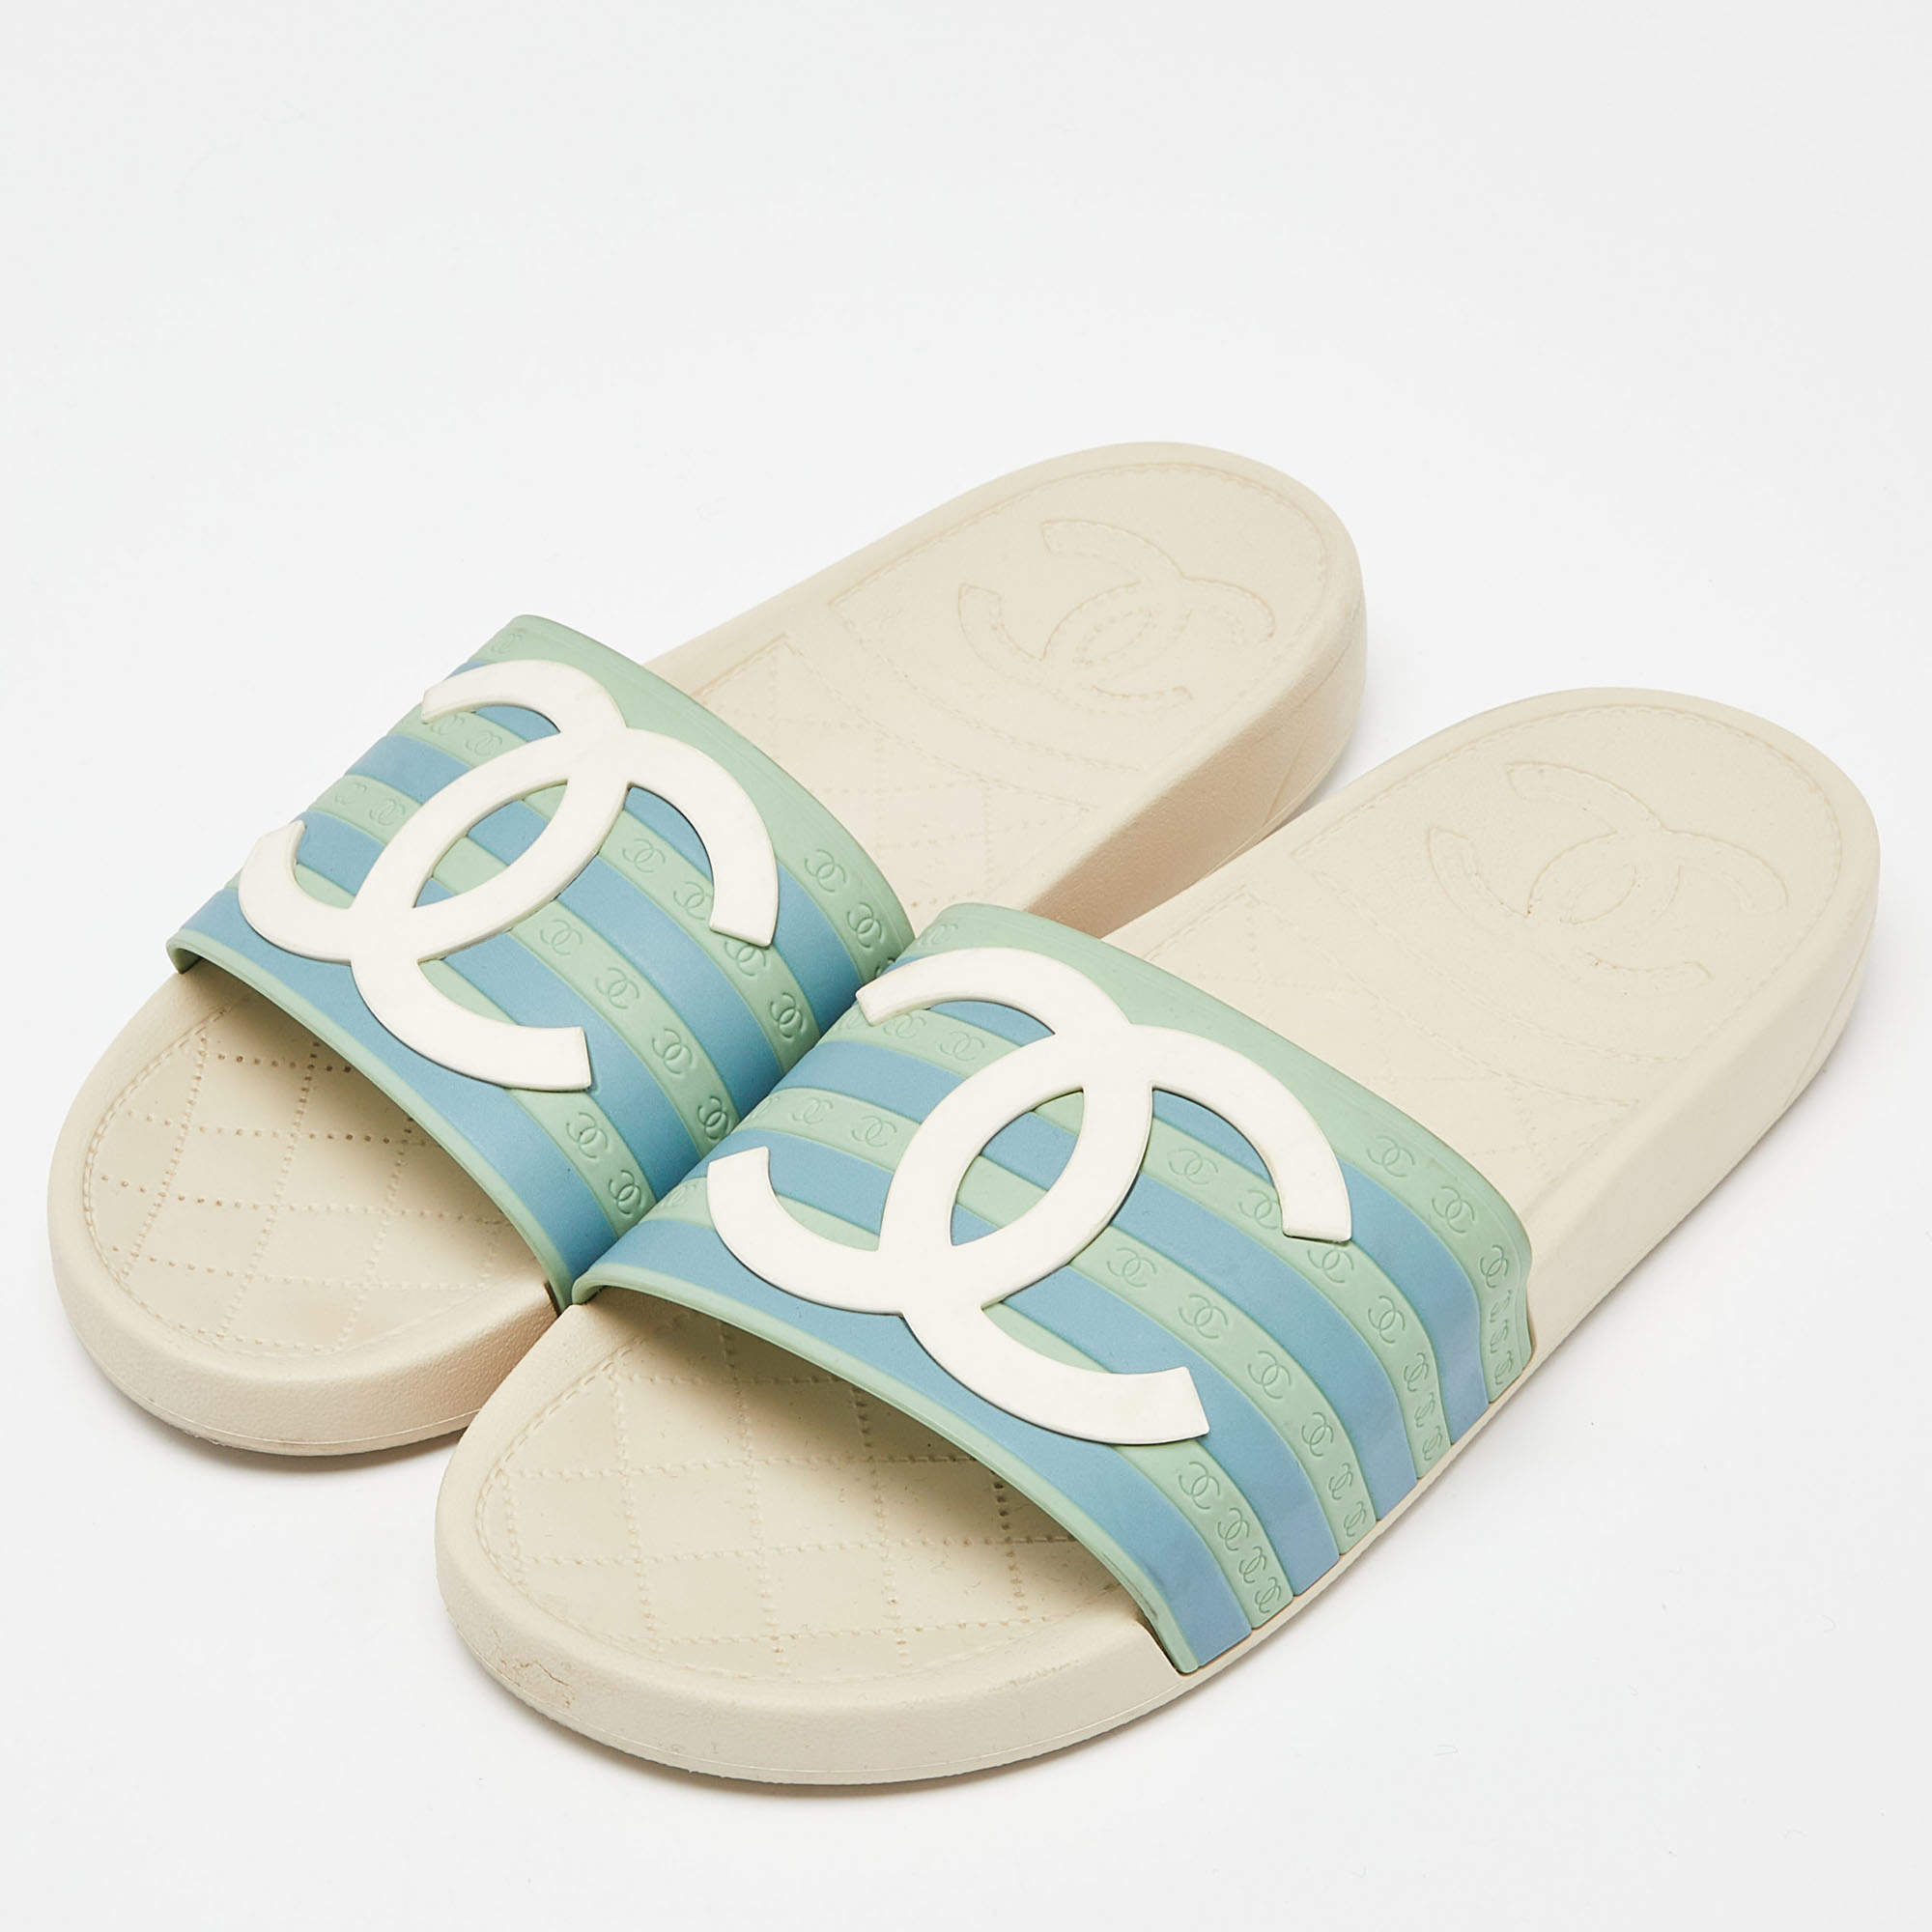 Chanel Quilted Leather CC Logo Sandals Green Pink Blue 37.5